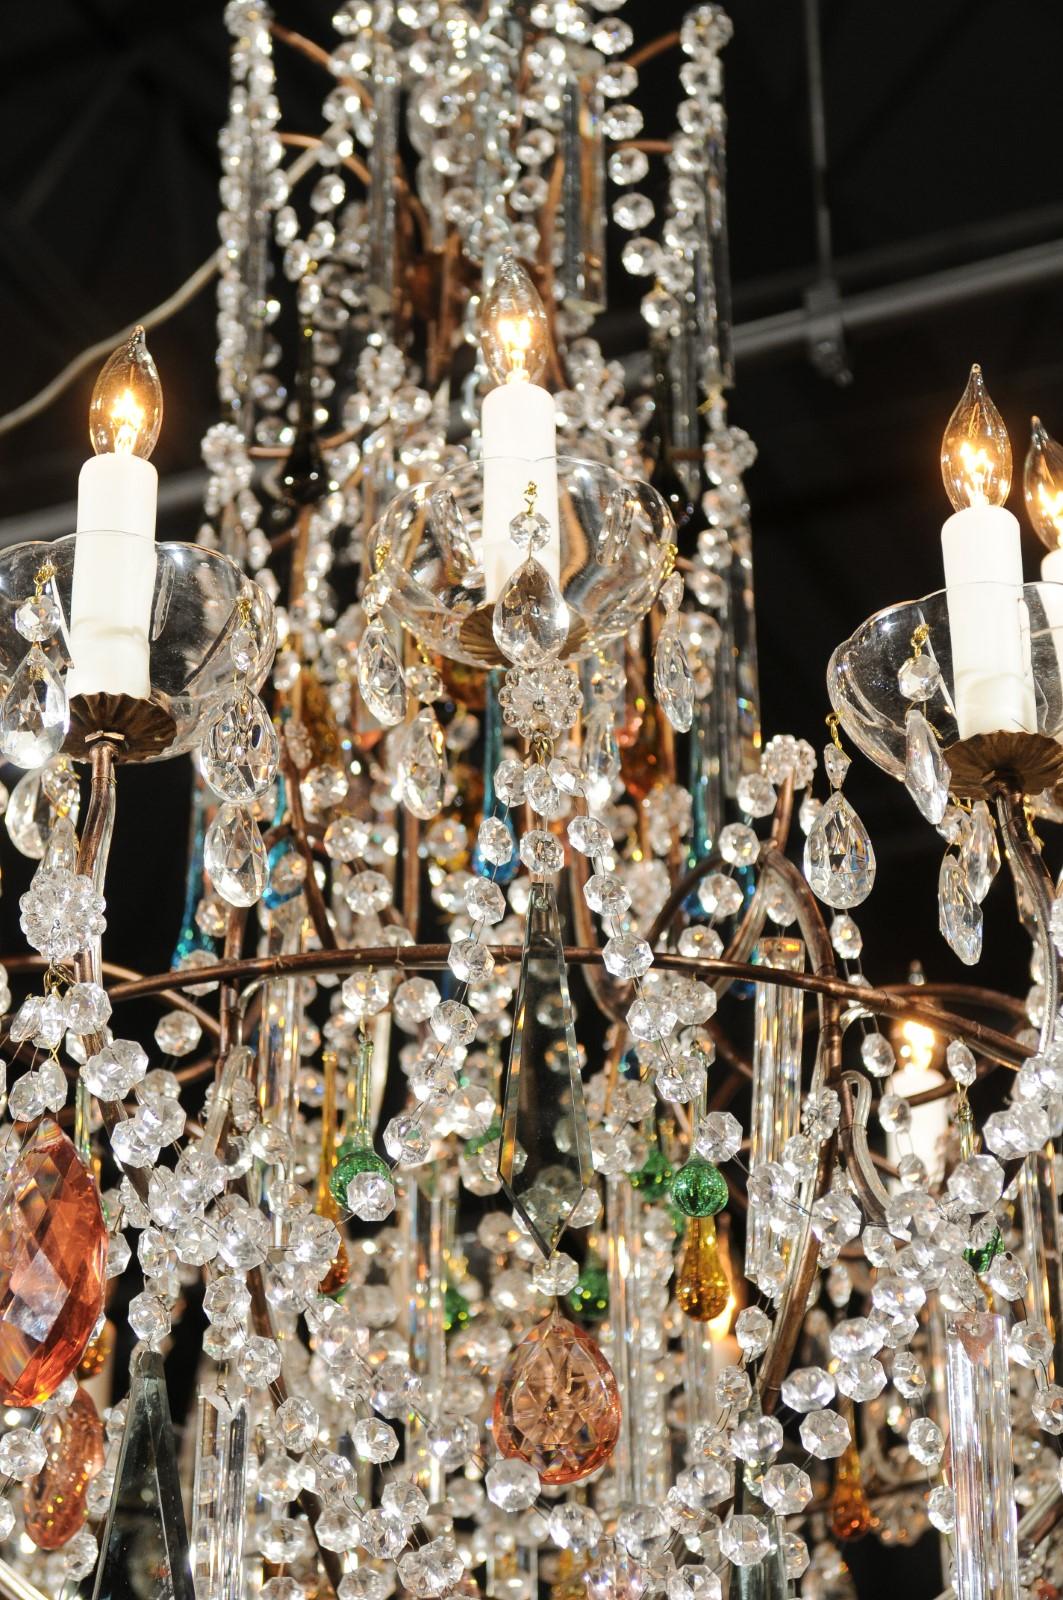 An Italian vintage crystal 16-light chandelier from Florence with colorful crystals. Born in Florence during the midcentury period, this stunning crystal chandelier features a discreet metal armature supporting an abundance of crystals of various